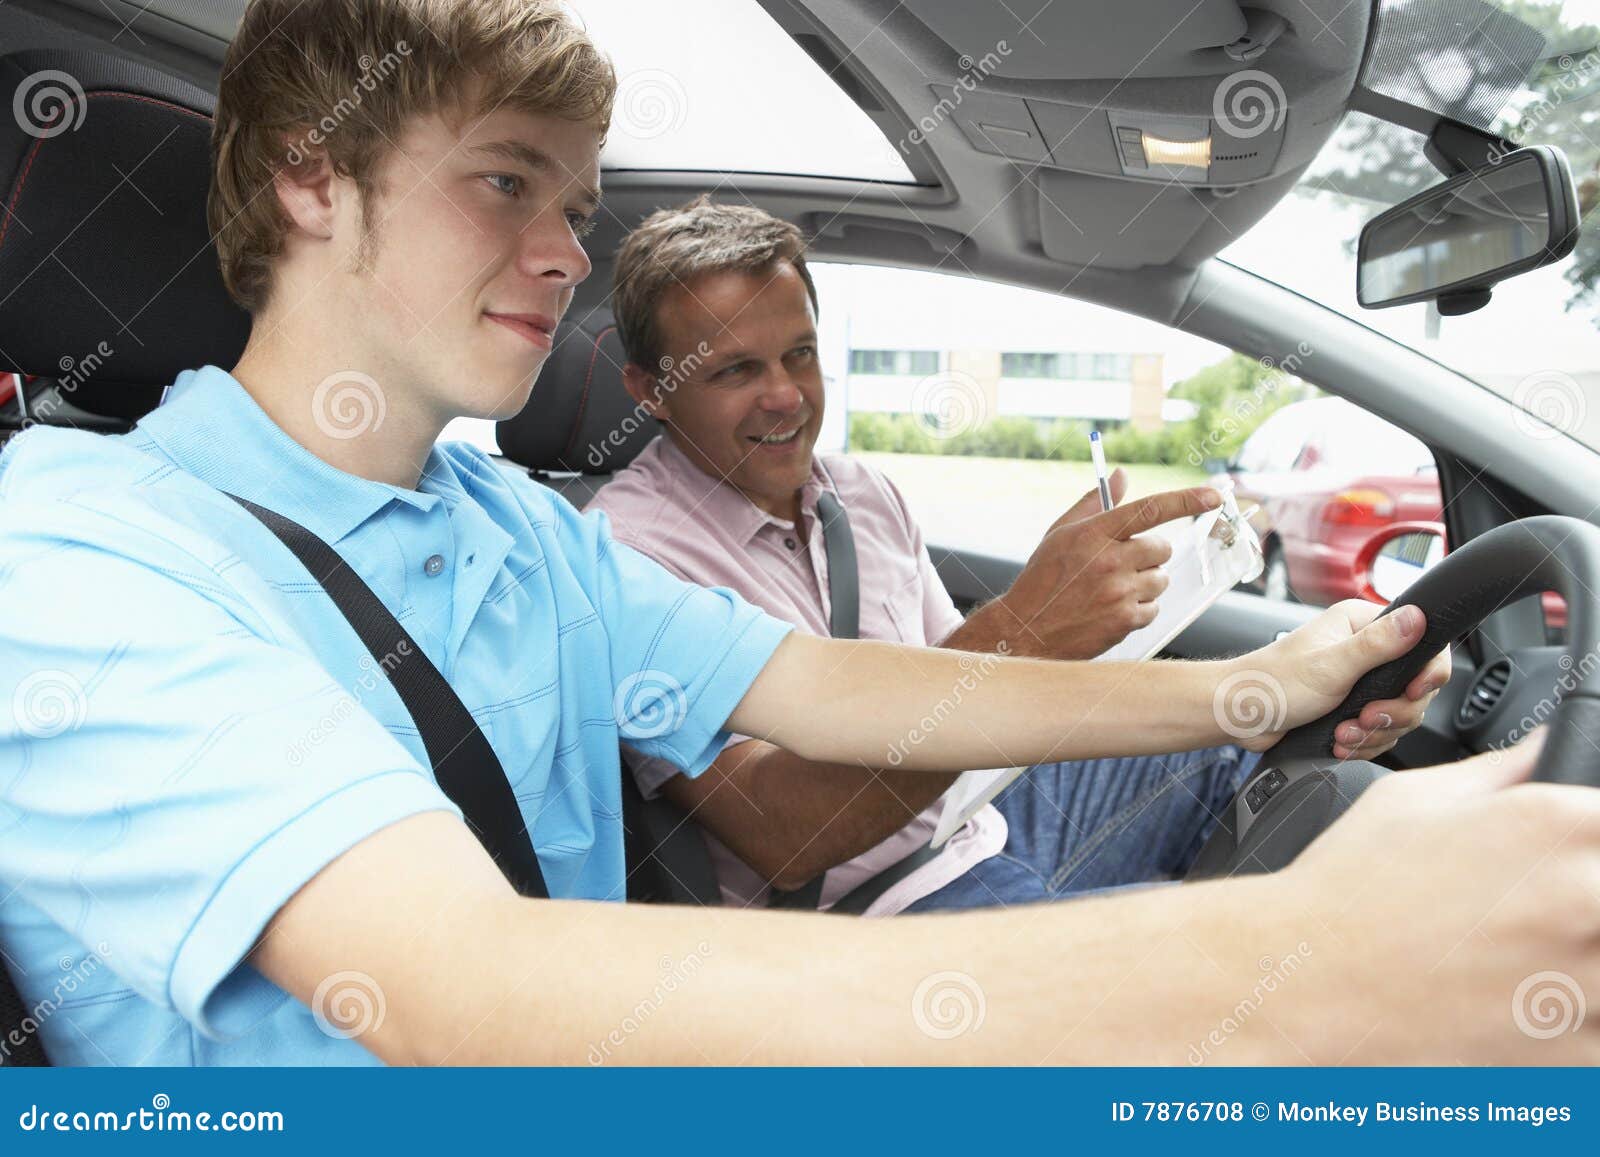 teenage boy taking a driving lesson